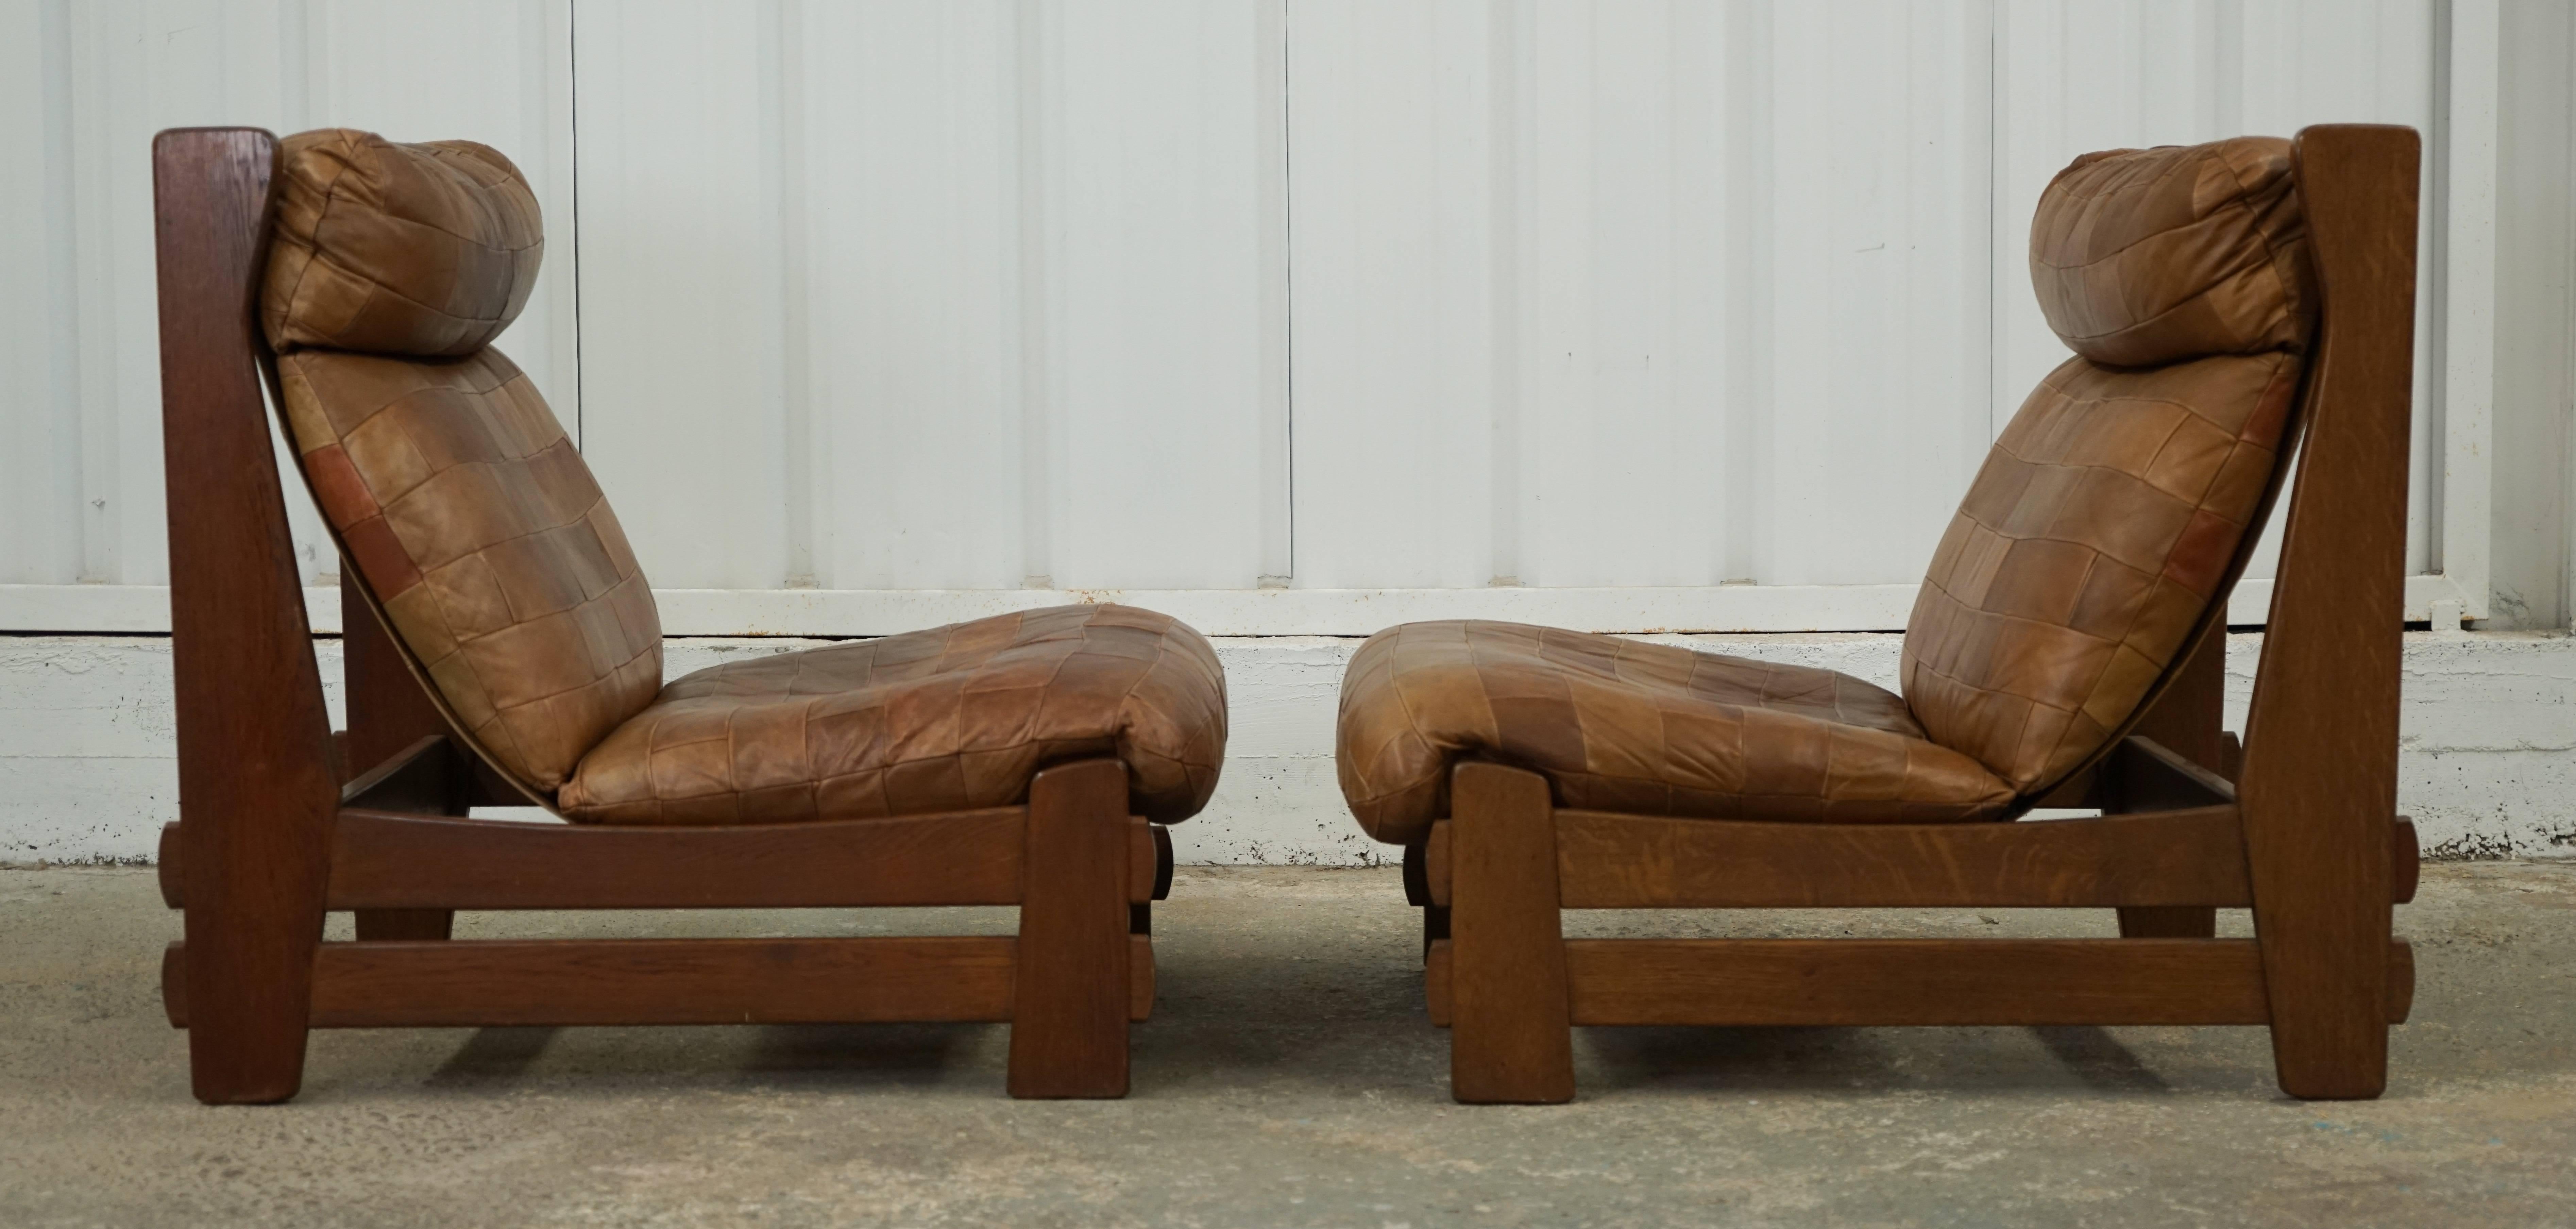 A pair of 1970s oak-framed slipper chairs by De Sede in Switzerland with perfectly aged patchwork leather cushion upholstery.